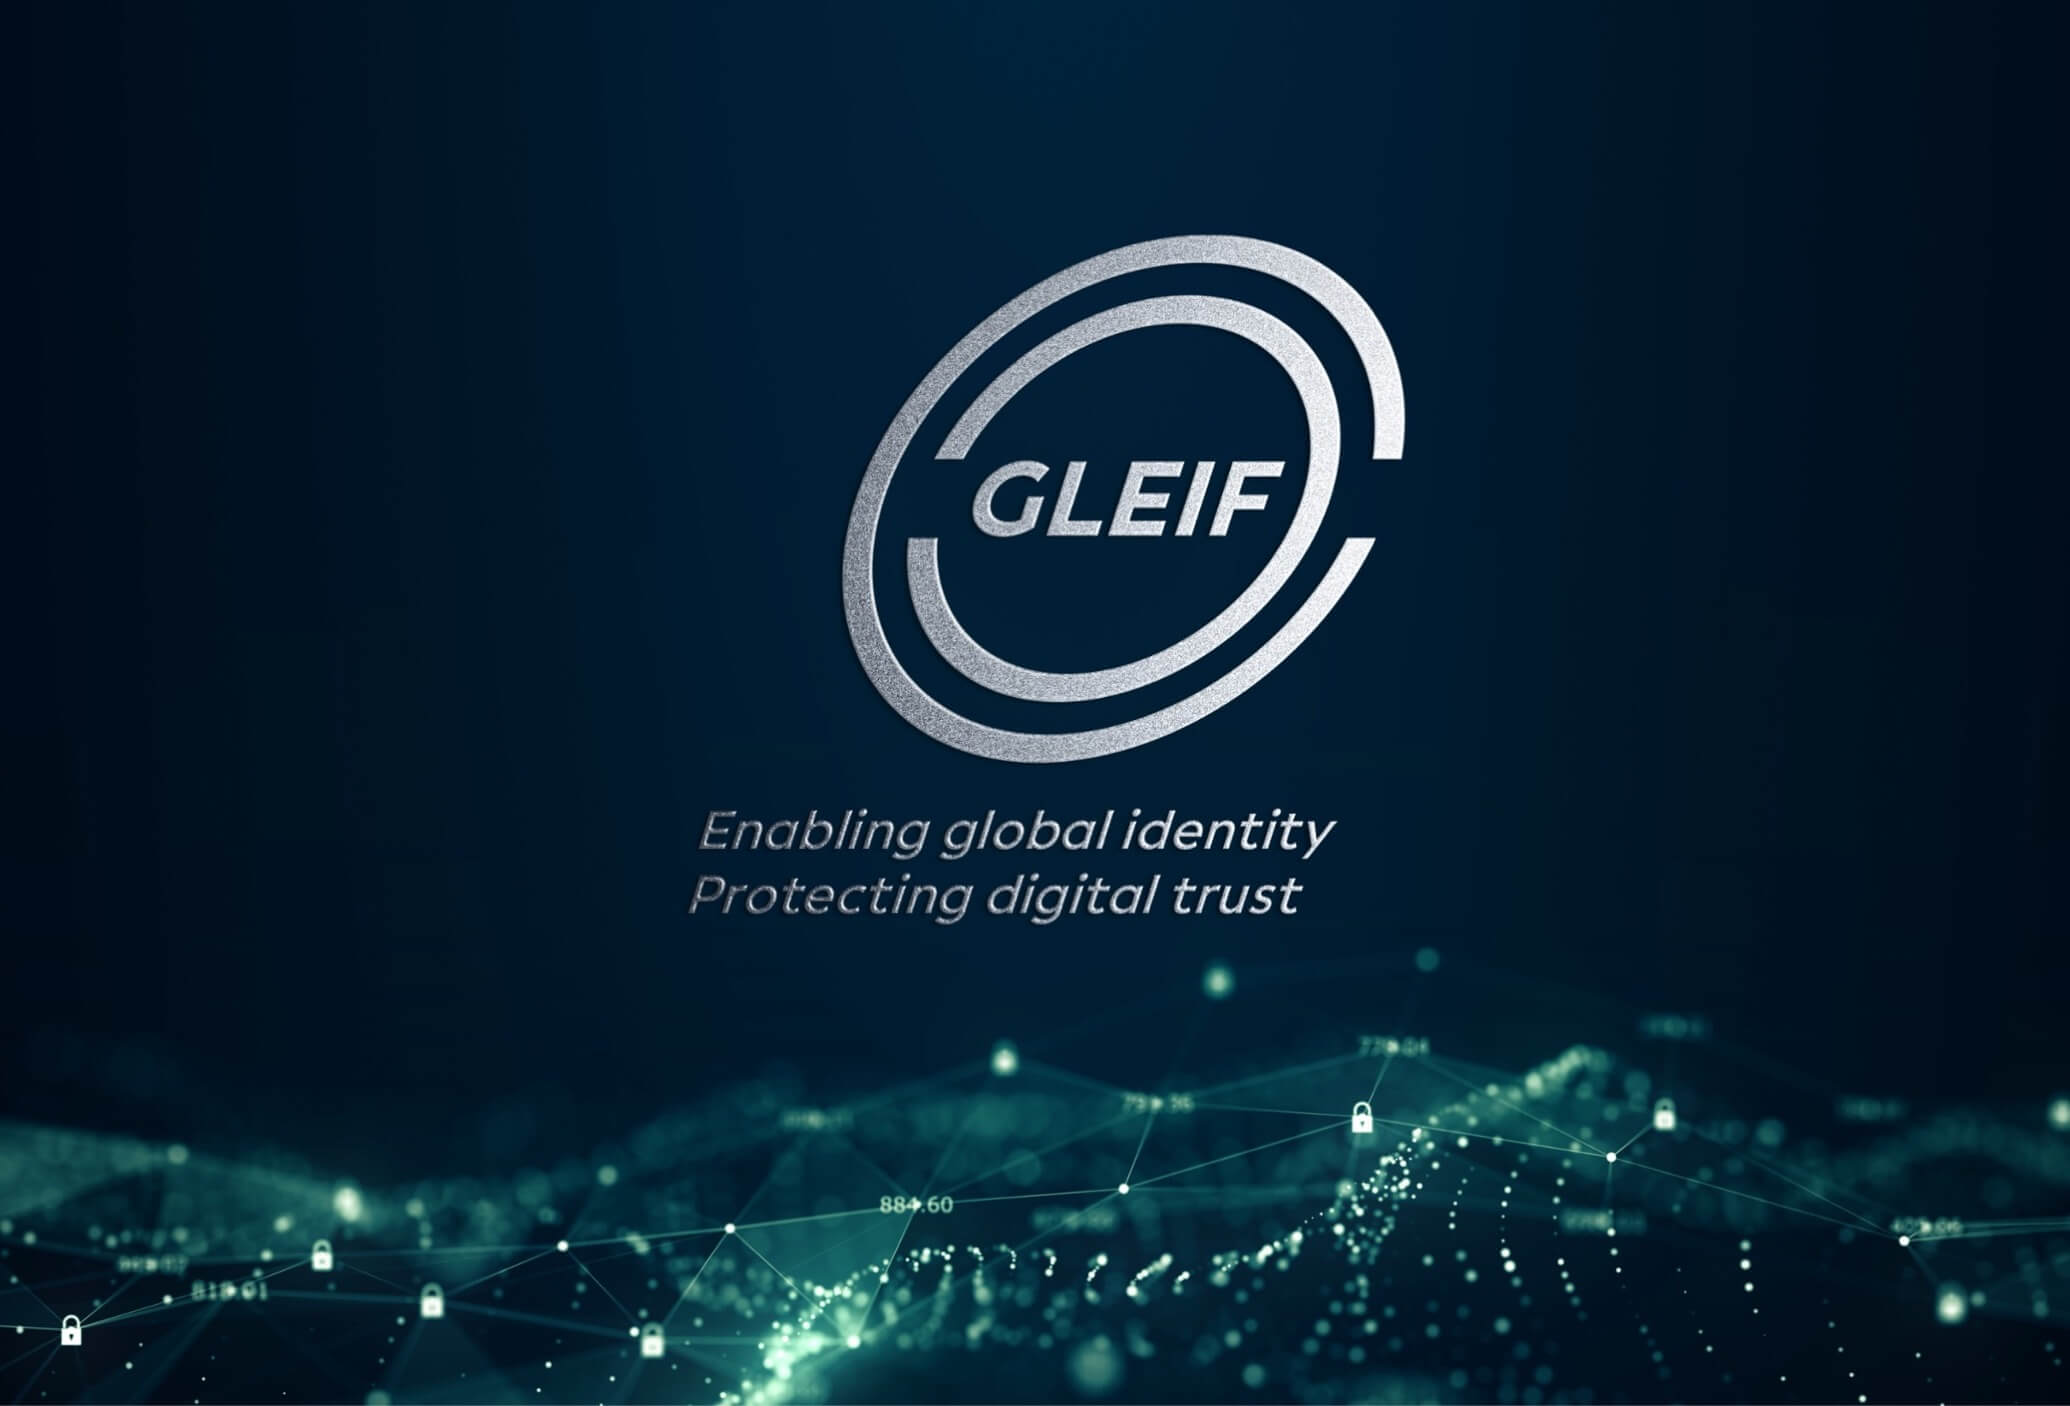 Featuring the LEI - Solutions – GLEIF